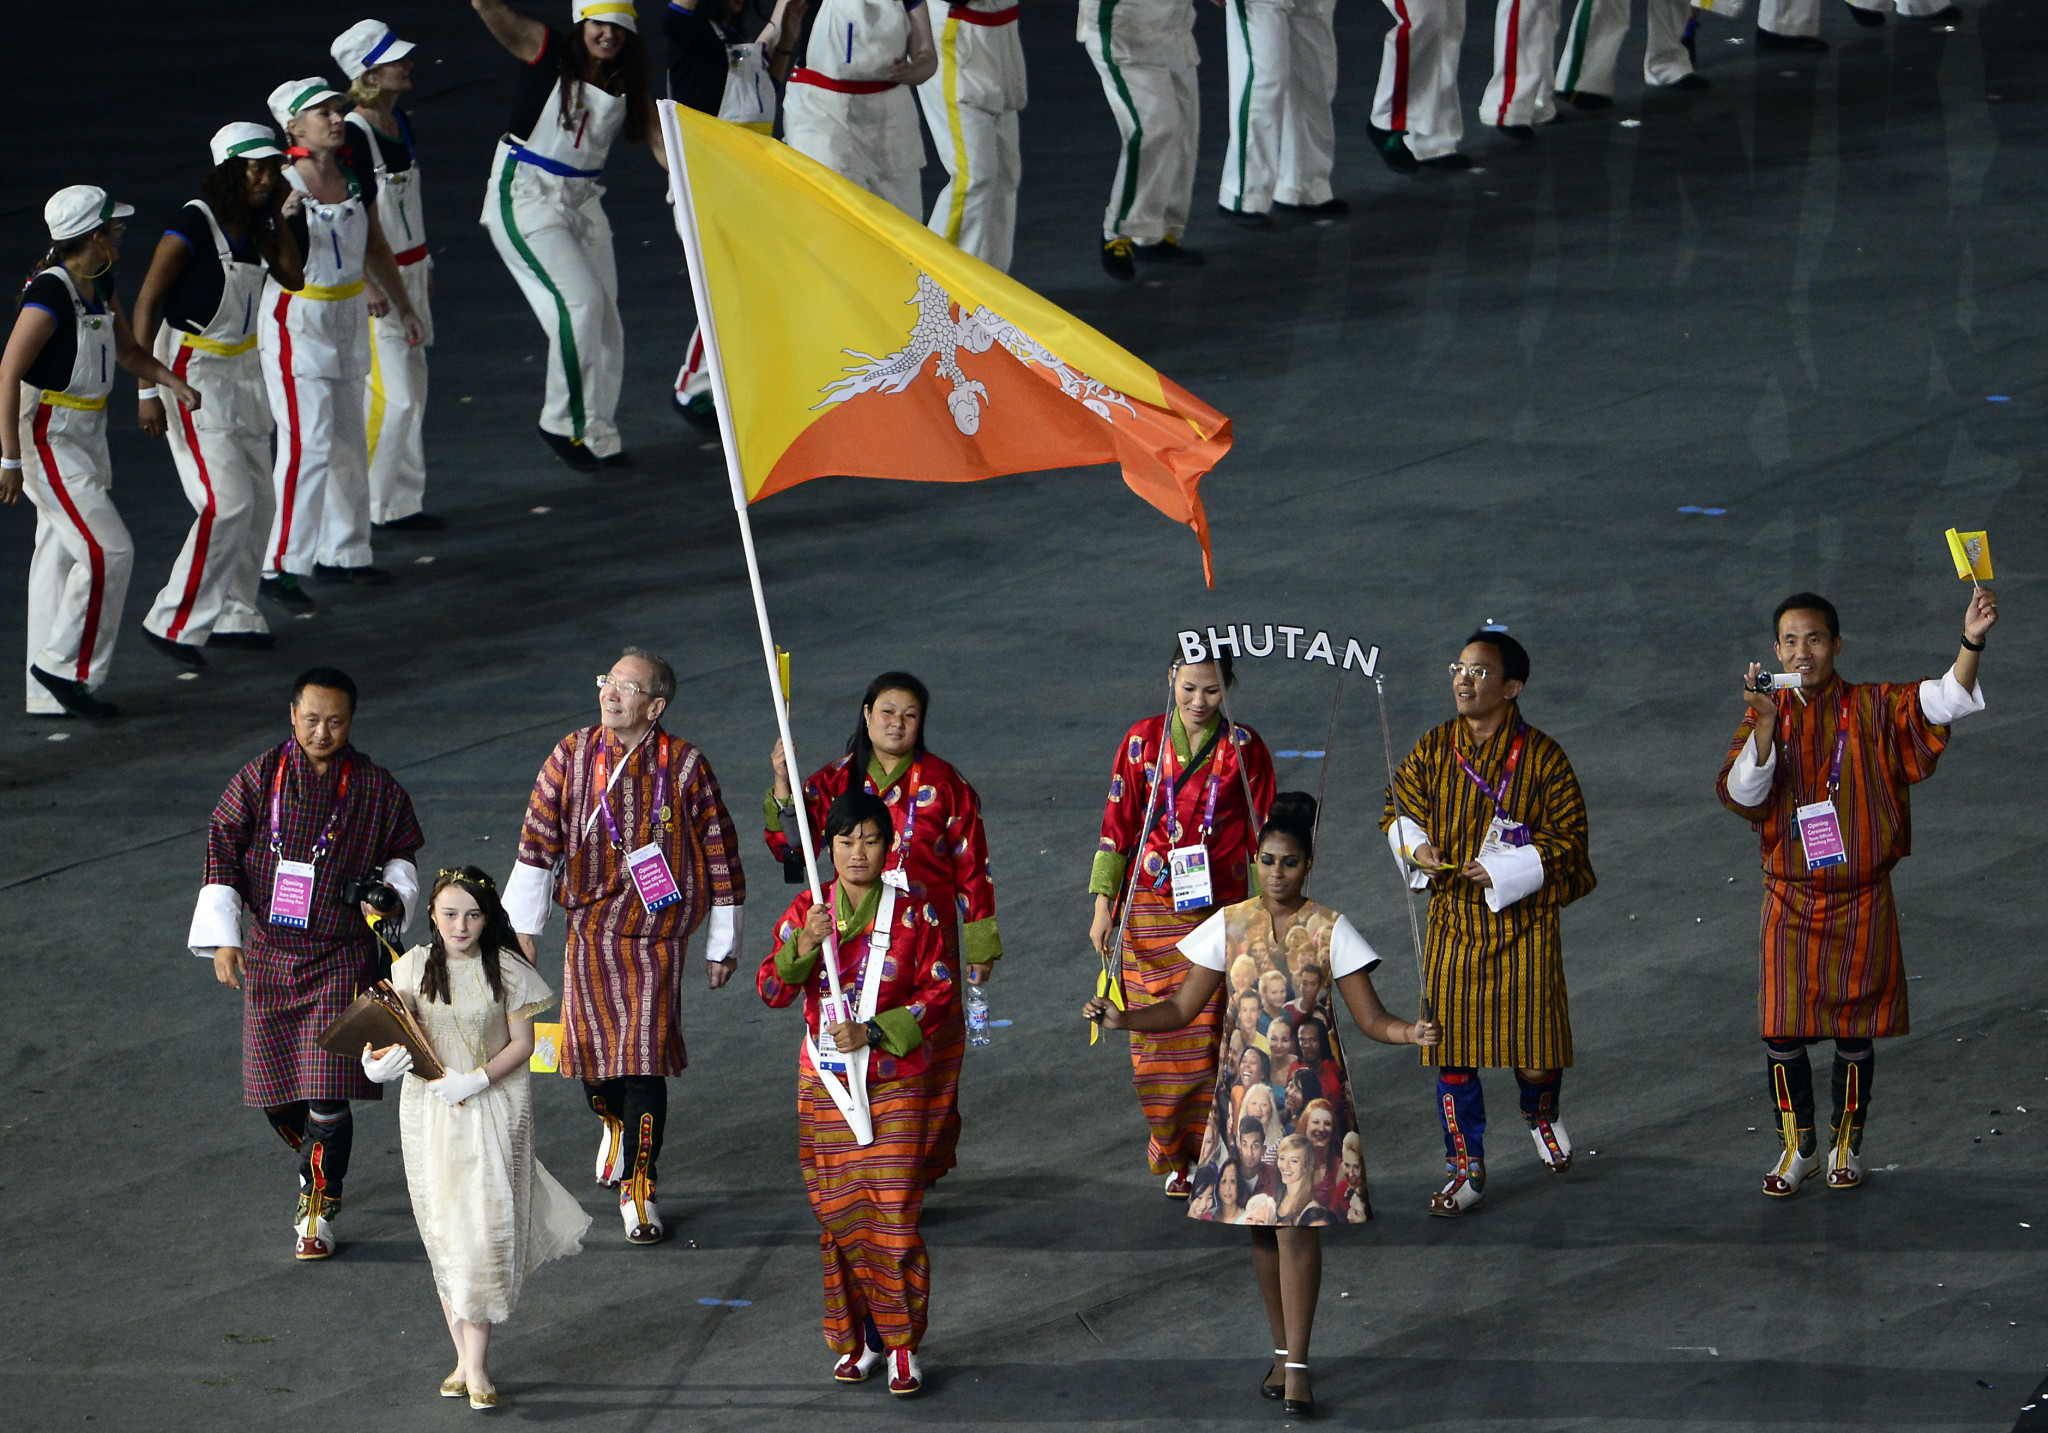 Bhutan NOC launch strategic plan until 2029 as continues search for first Olympic medal